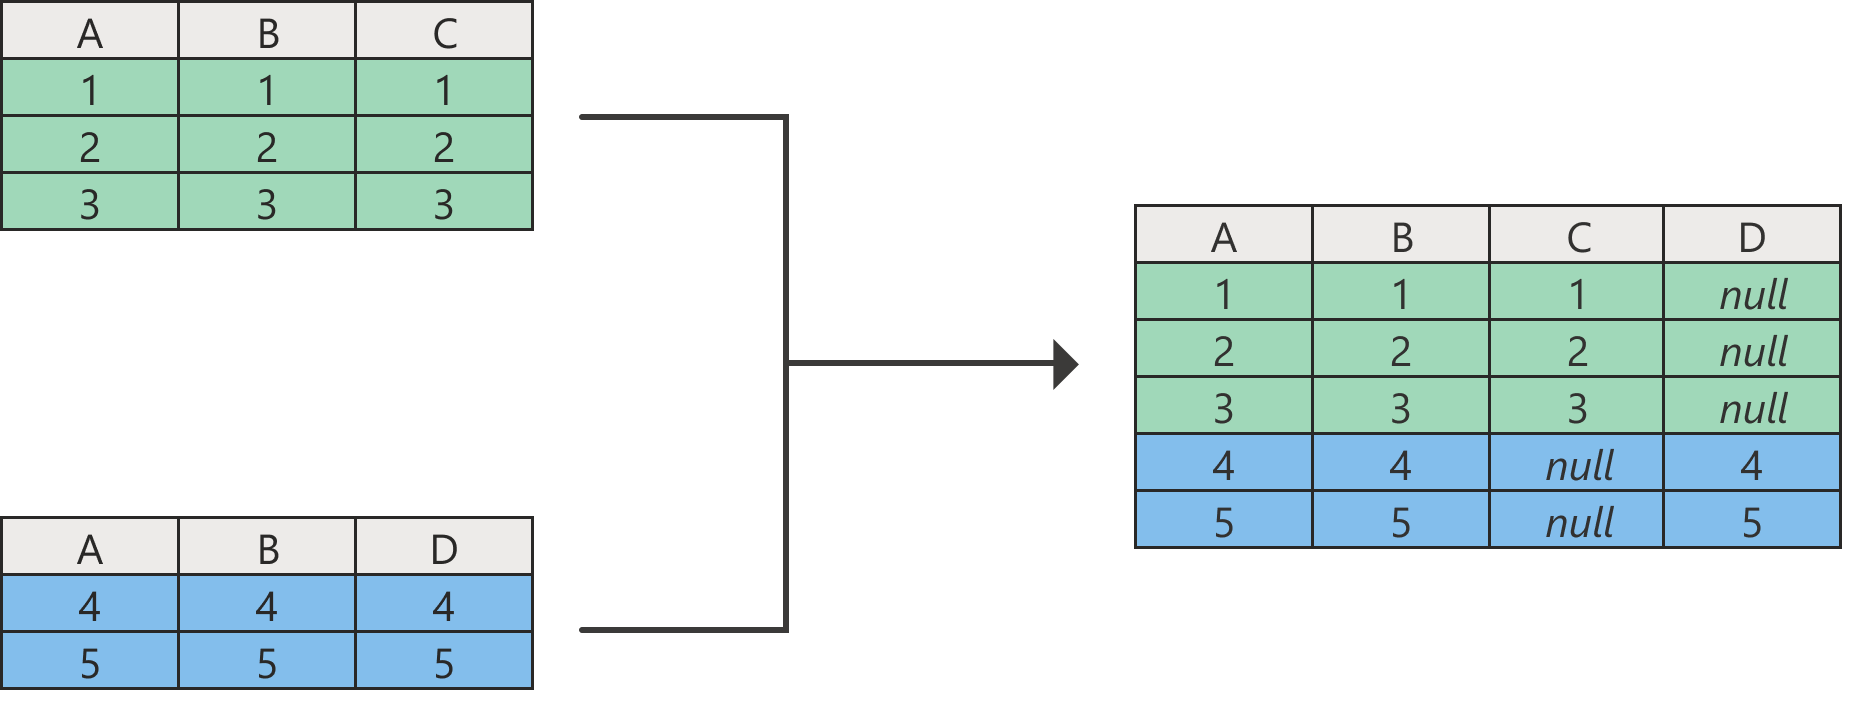 Diagram showing the result of an append operation with null values in columns that don’t exist in one of the original tables.